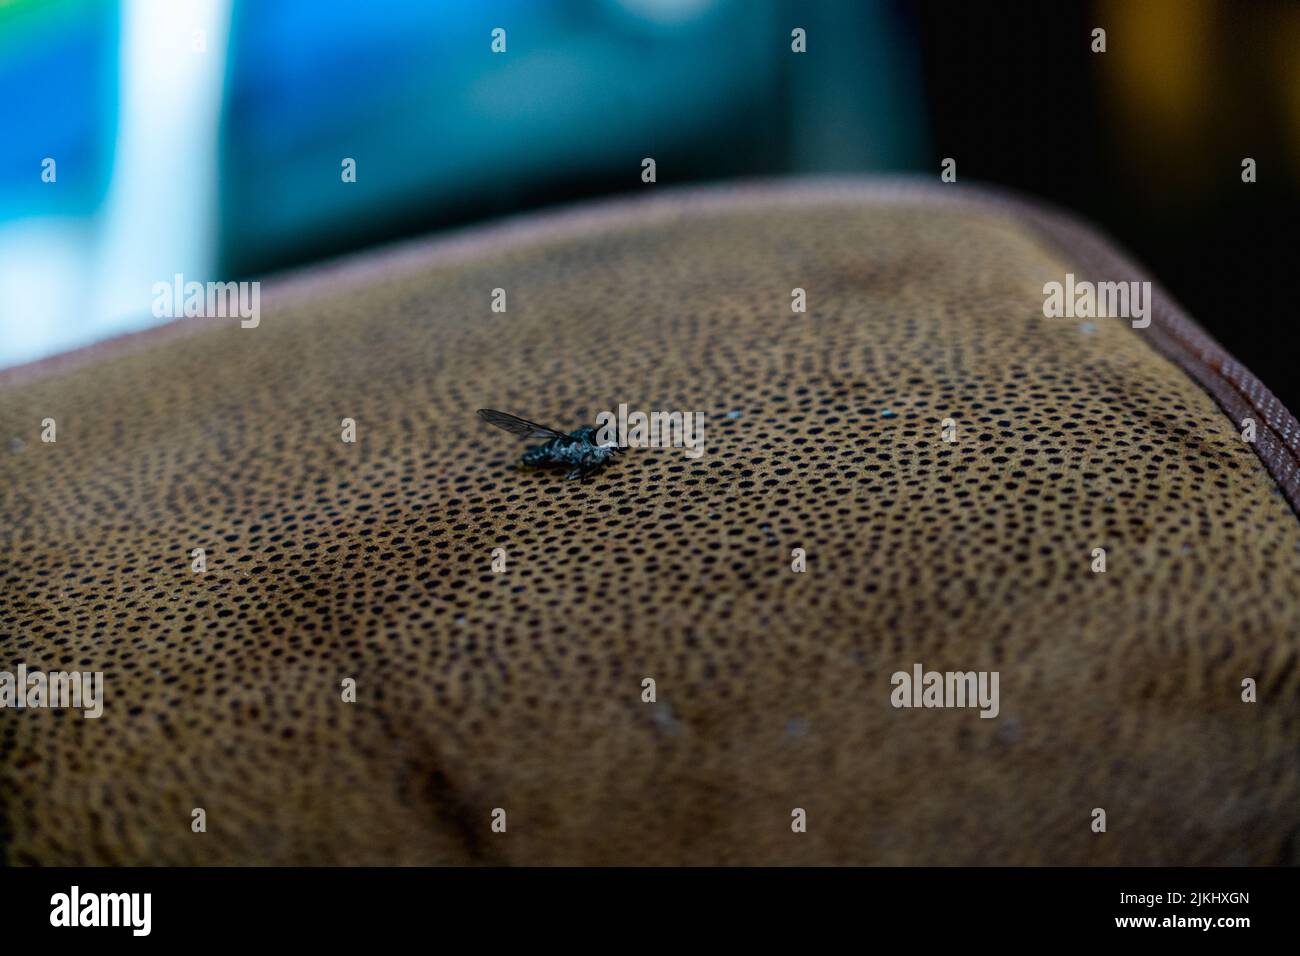 A closeup of a blue mite sitting on a leather surface of a sofa or a carpet Stock Photo